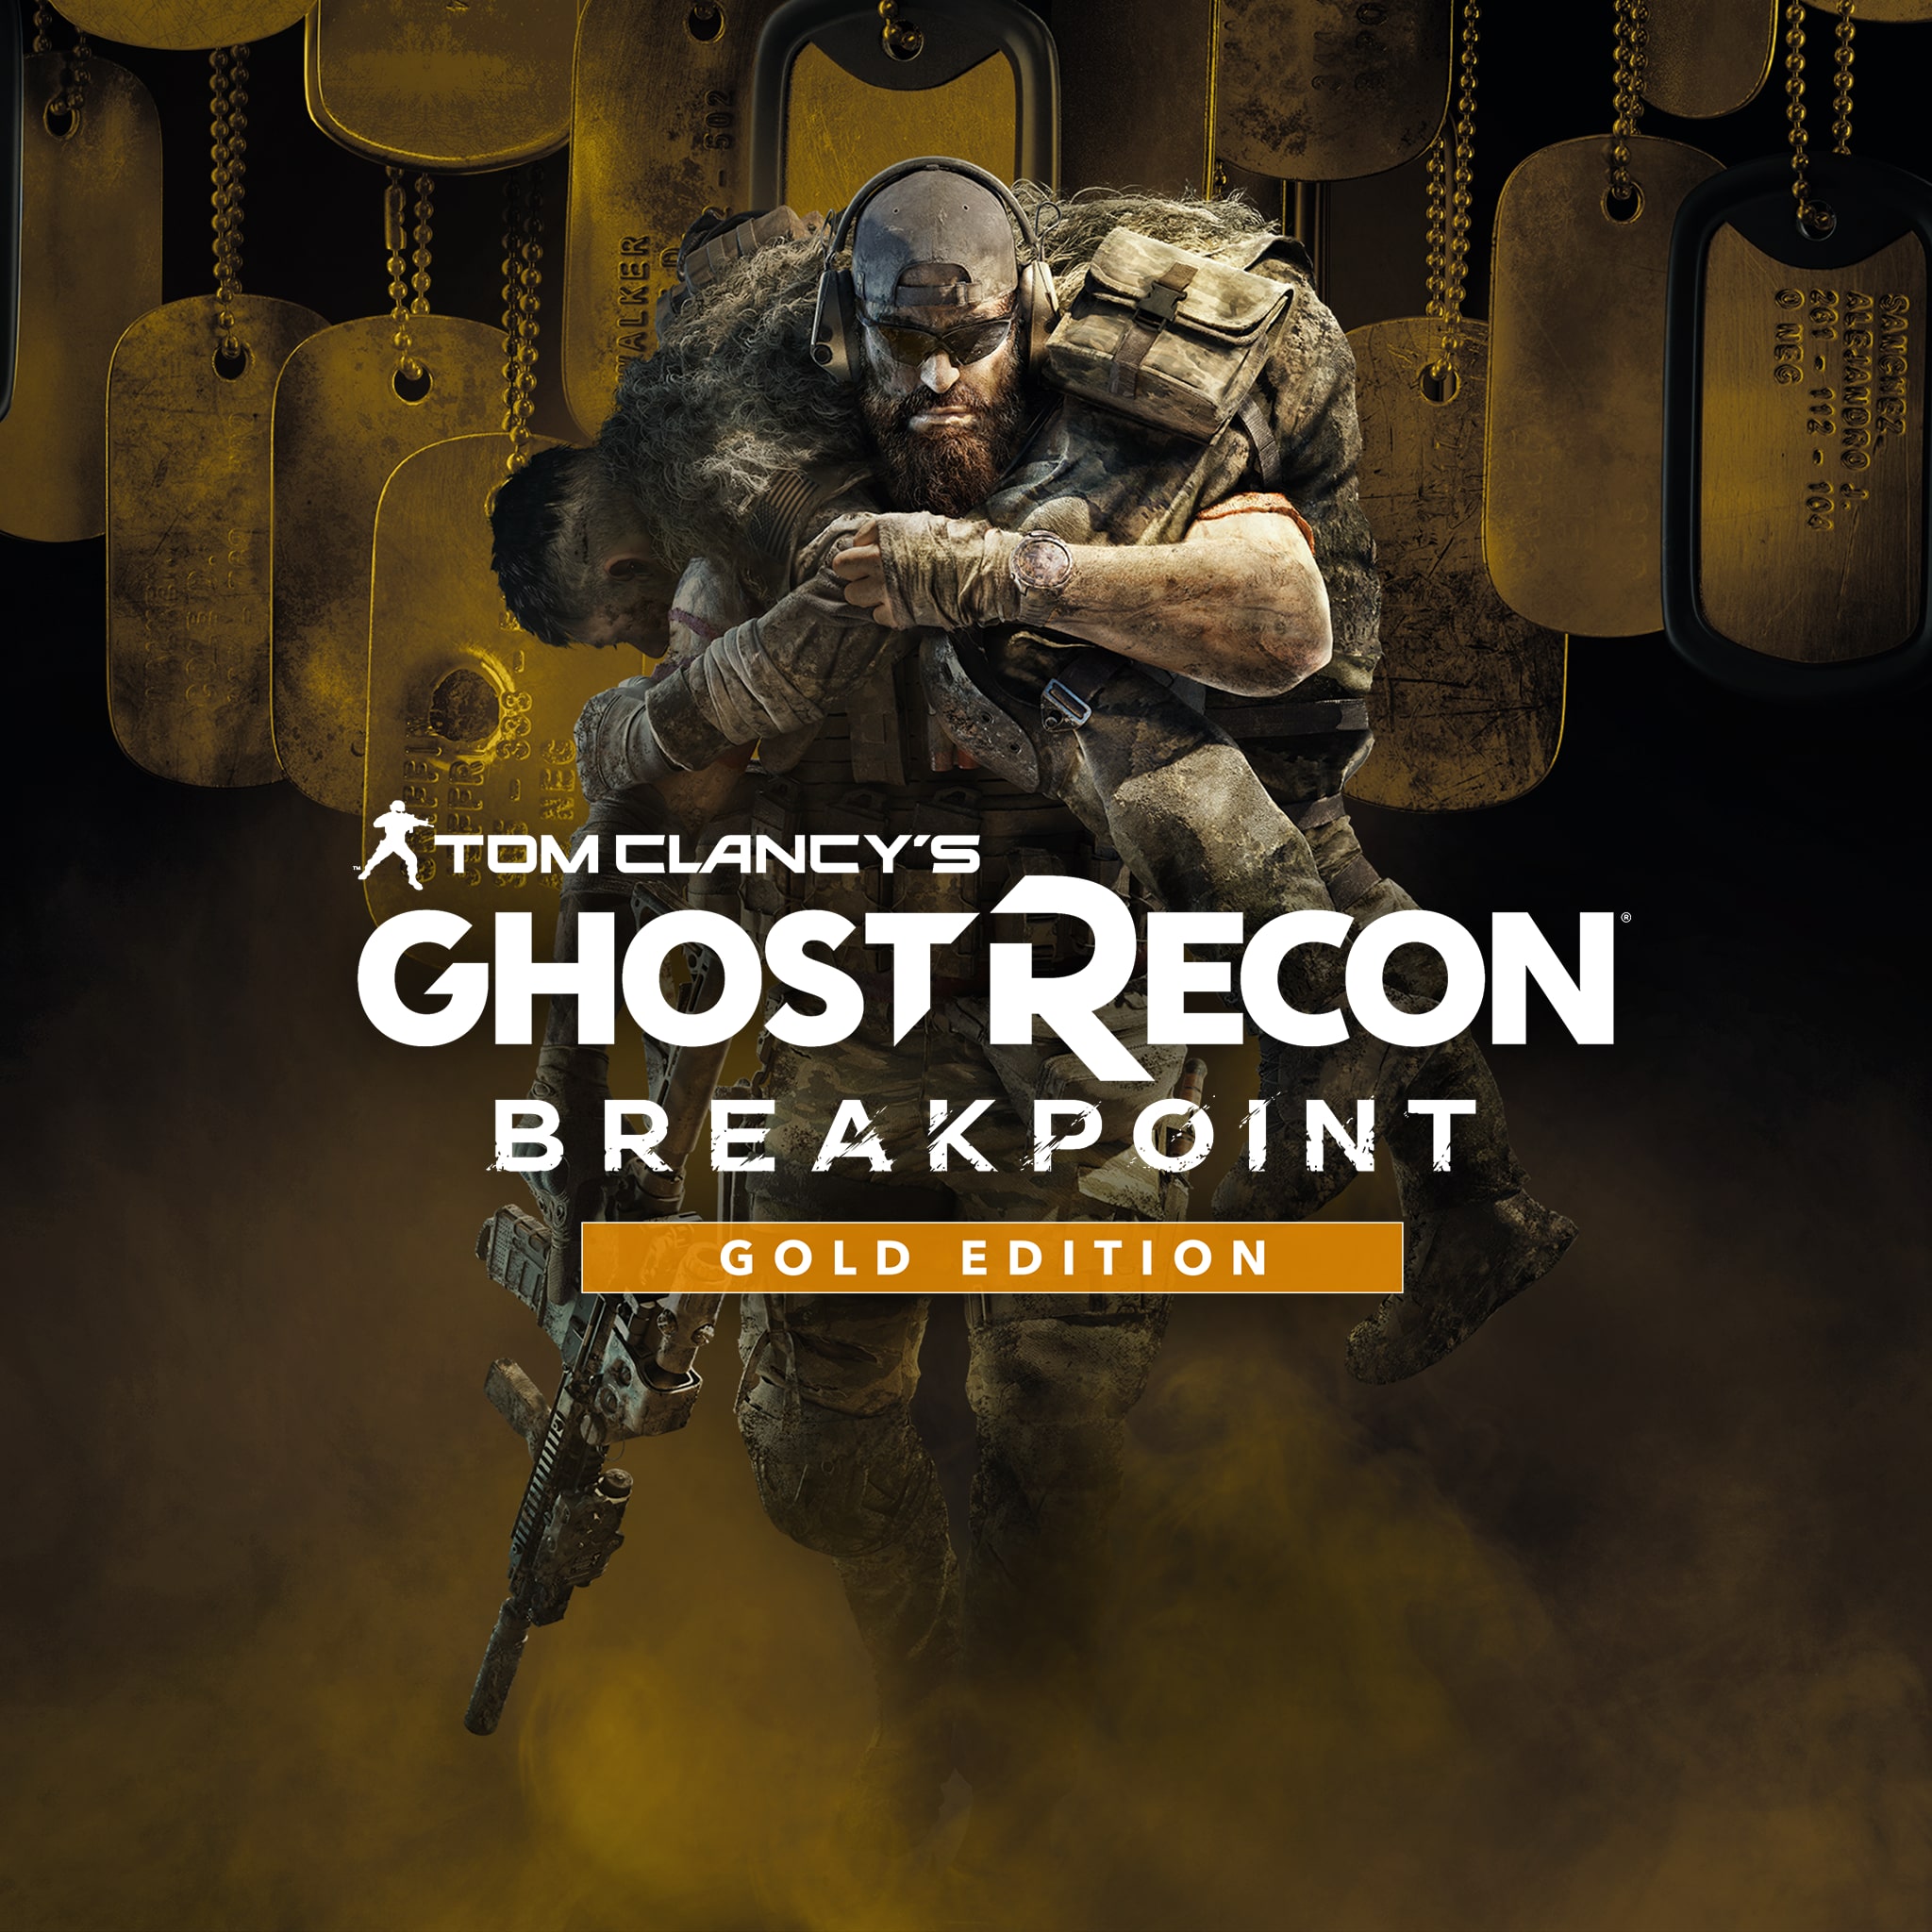 ghost recon playstation 4